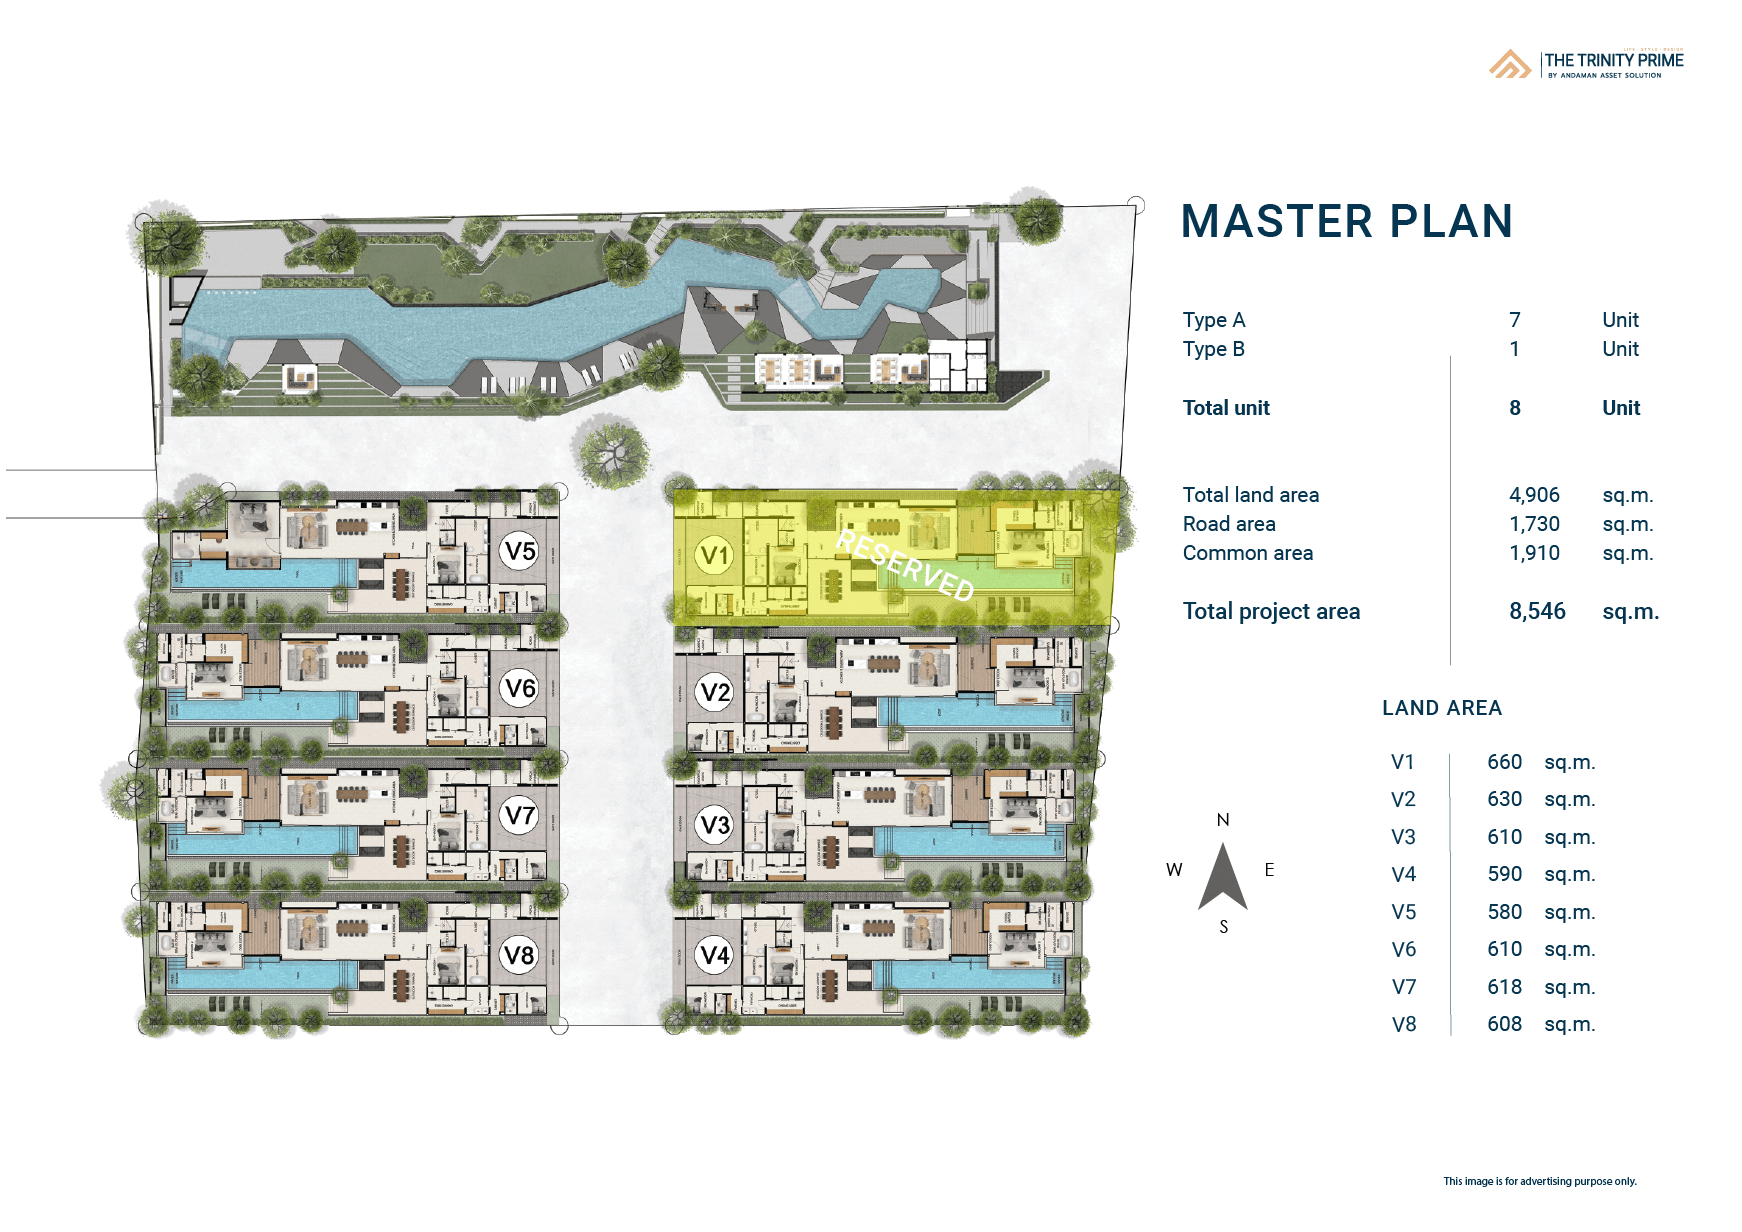 The Trinity Prime Master Plan Update as of November 2022